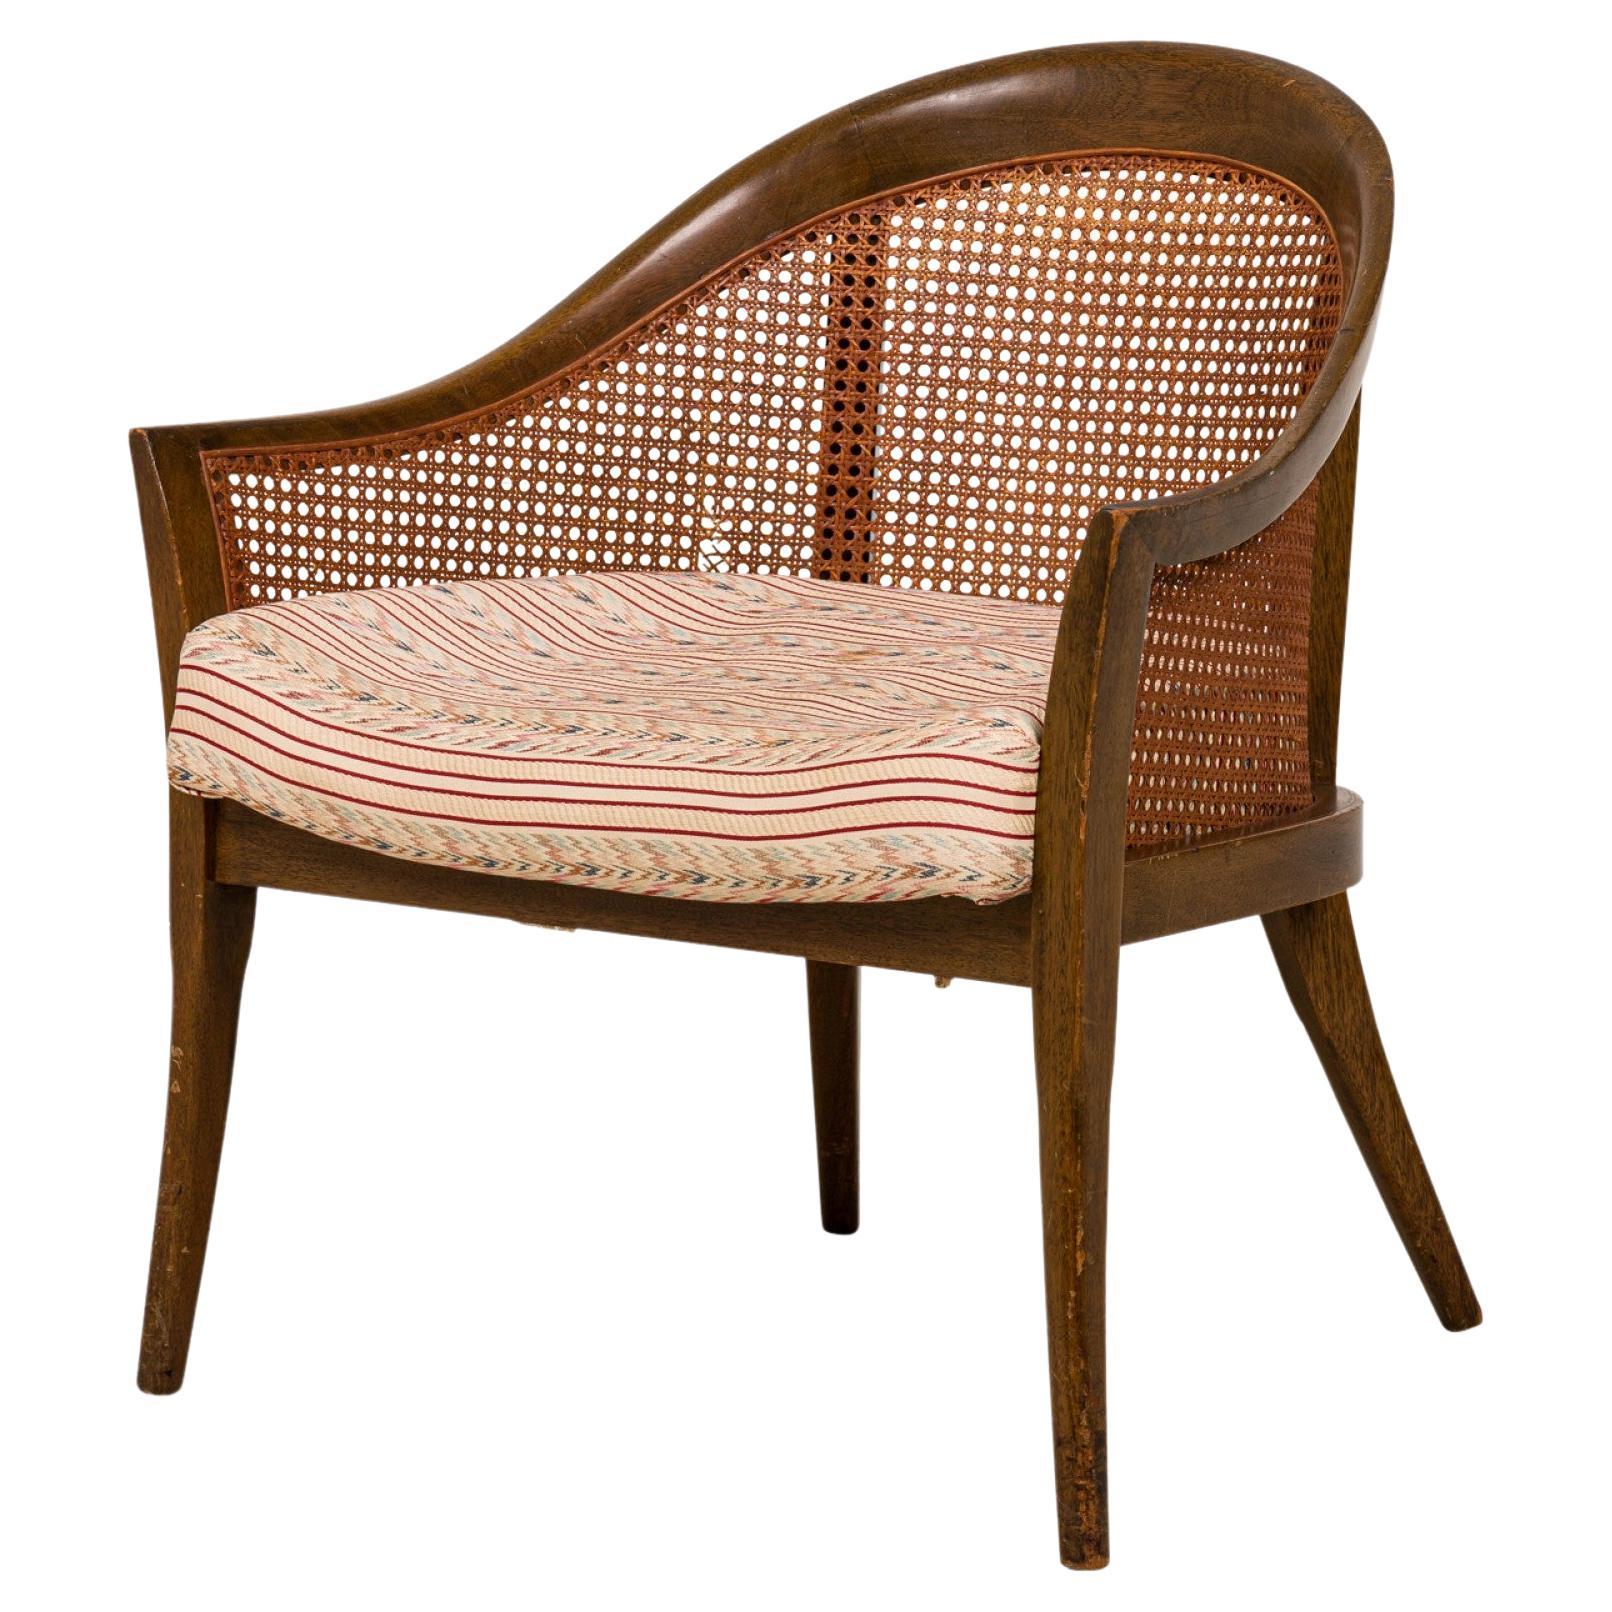 Harvey Probber, Caning, and Striped Upholstery Armchair For Sale